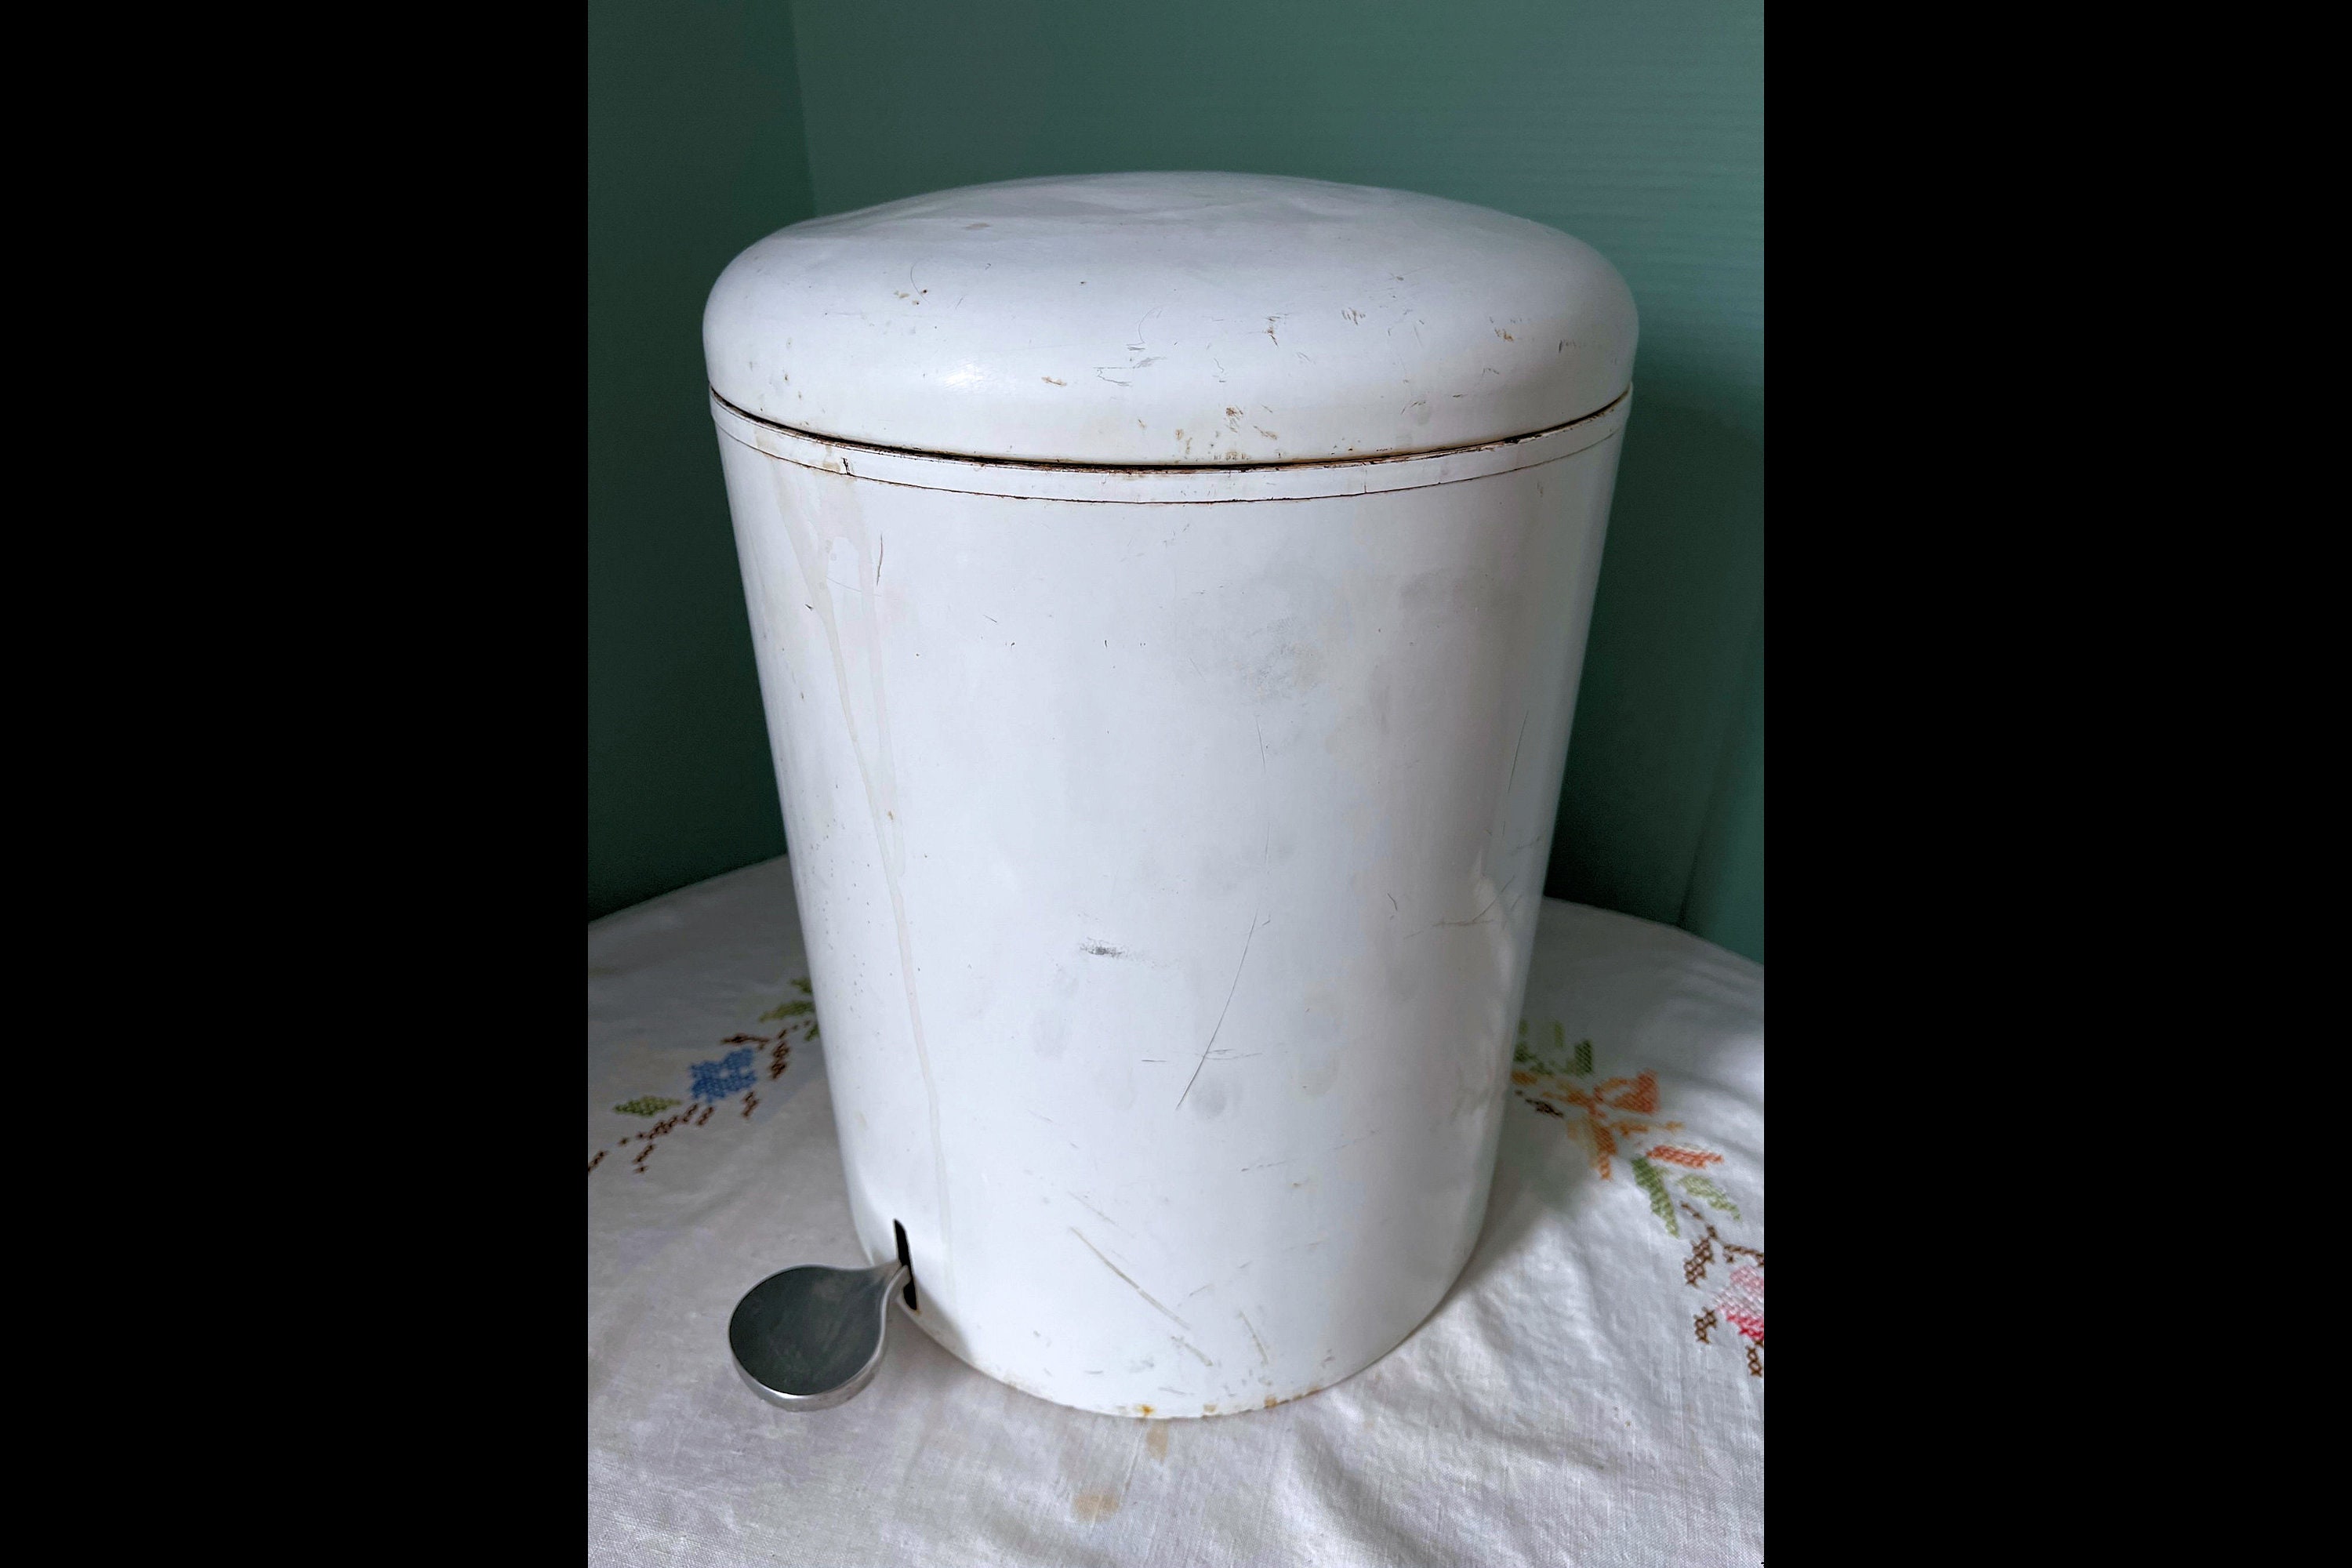 JKXWX Trash Can Rubbish Bin Sophisticated and Elegant French Household  Trash Can Hand-Painted Color …See more JKXWX Trash Can Rubbish Bin